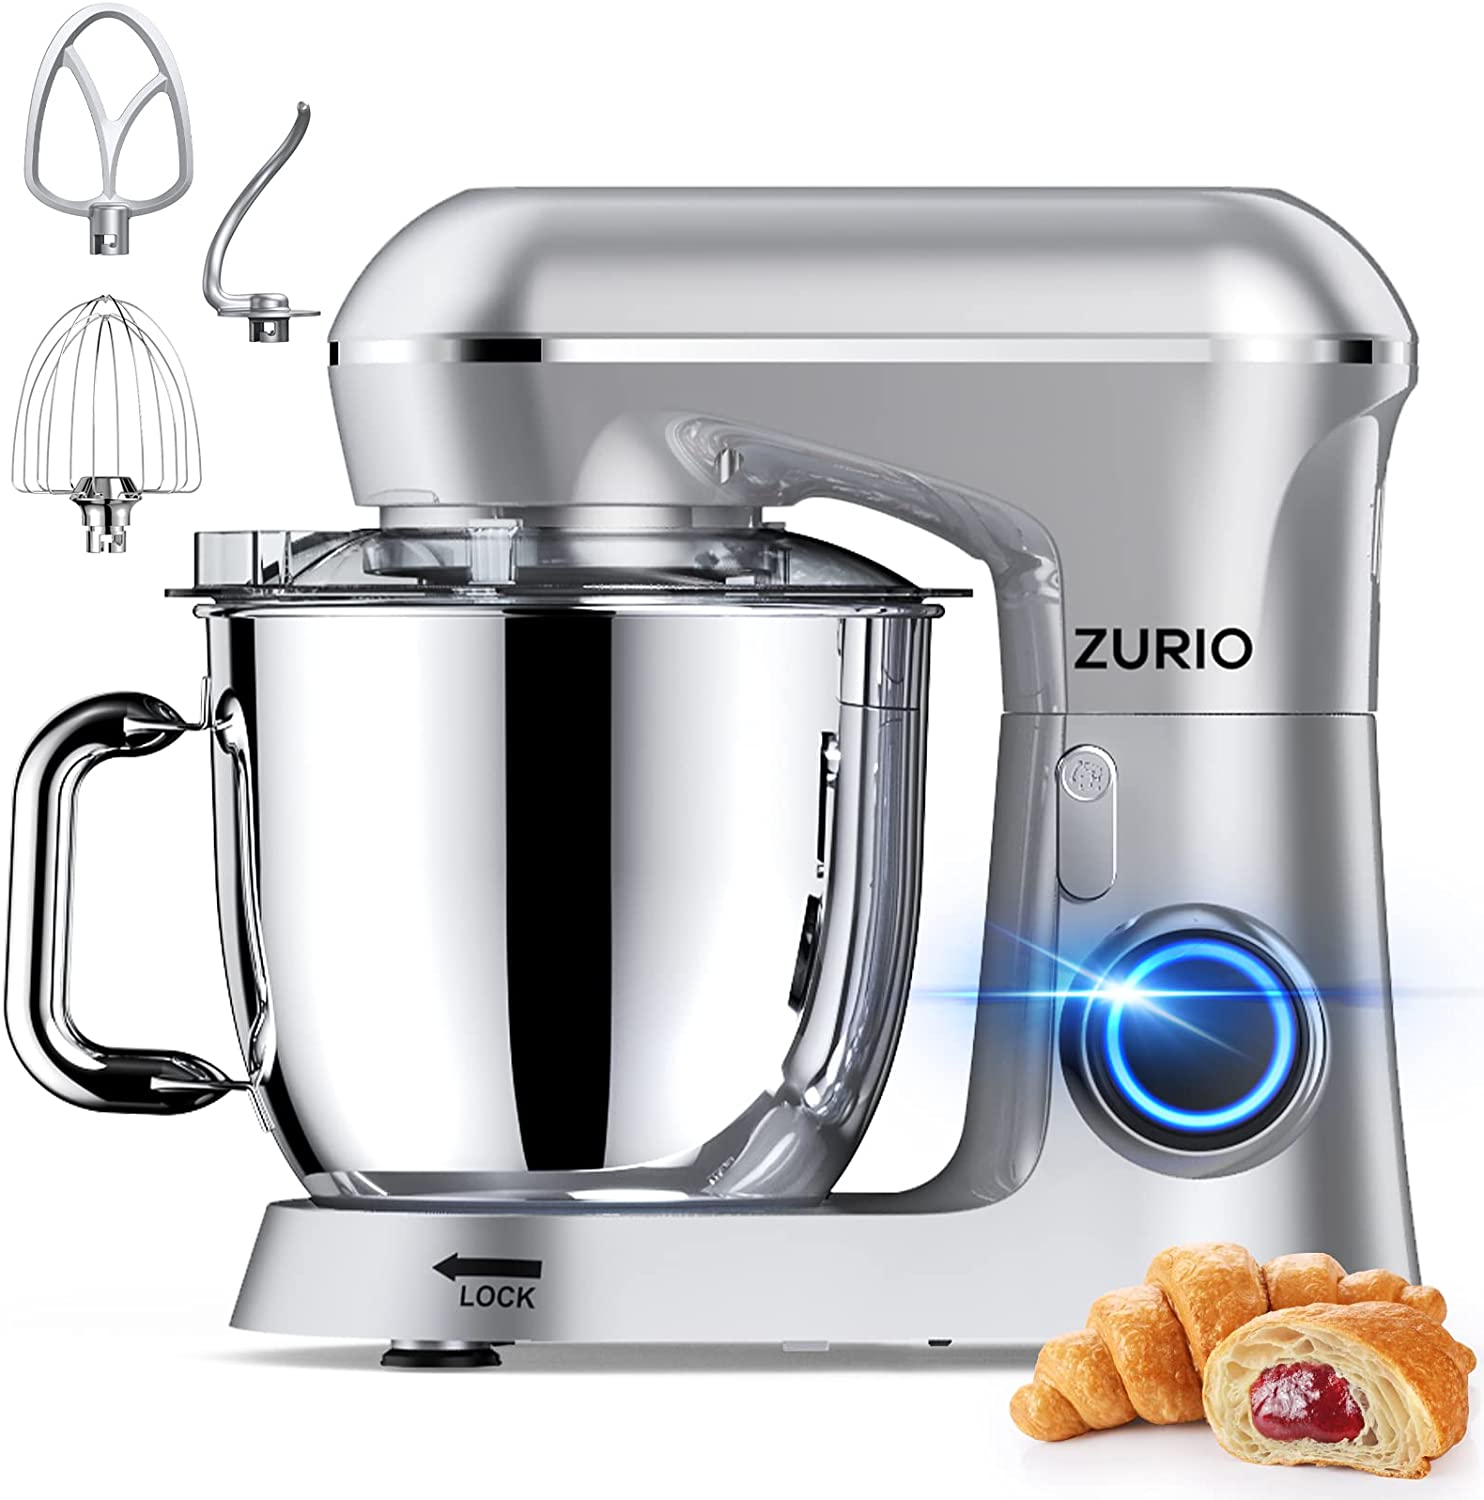 zurio Zuiro Food Processor Mixer 1300 W 4.5 L Kneading Machine Mixing Machine 10-Speed Robot Kneading Machine with Quiet Fermentation Function, with Accessories Dough Hook, Whisk, Kneader, Silver